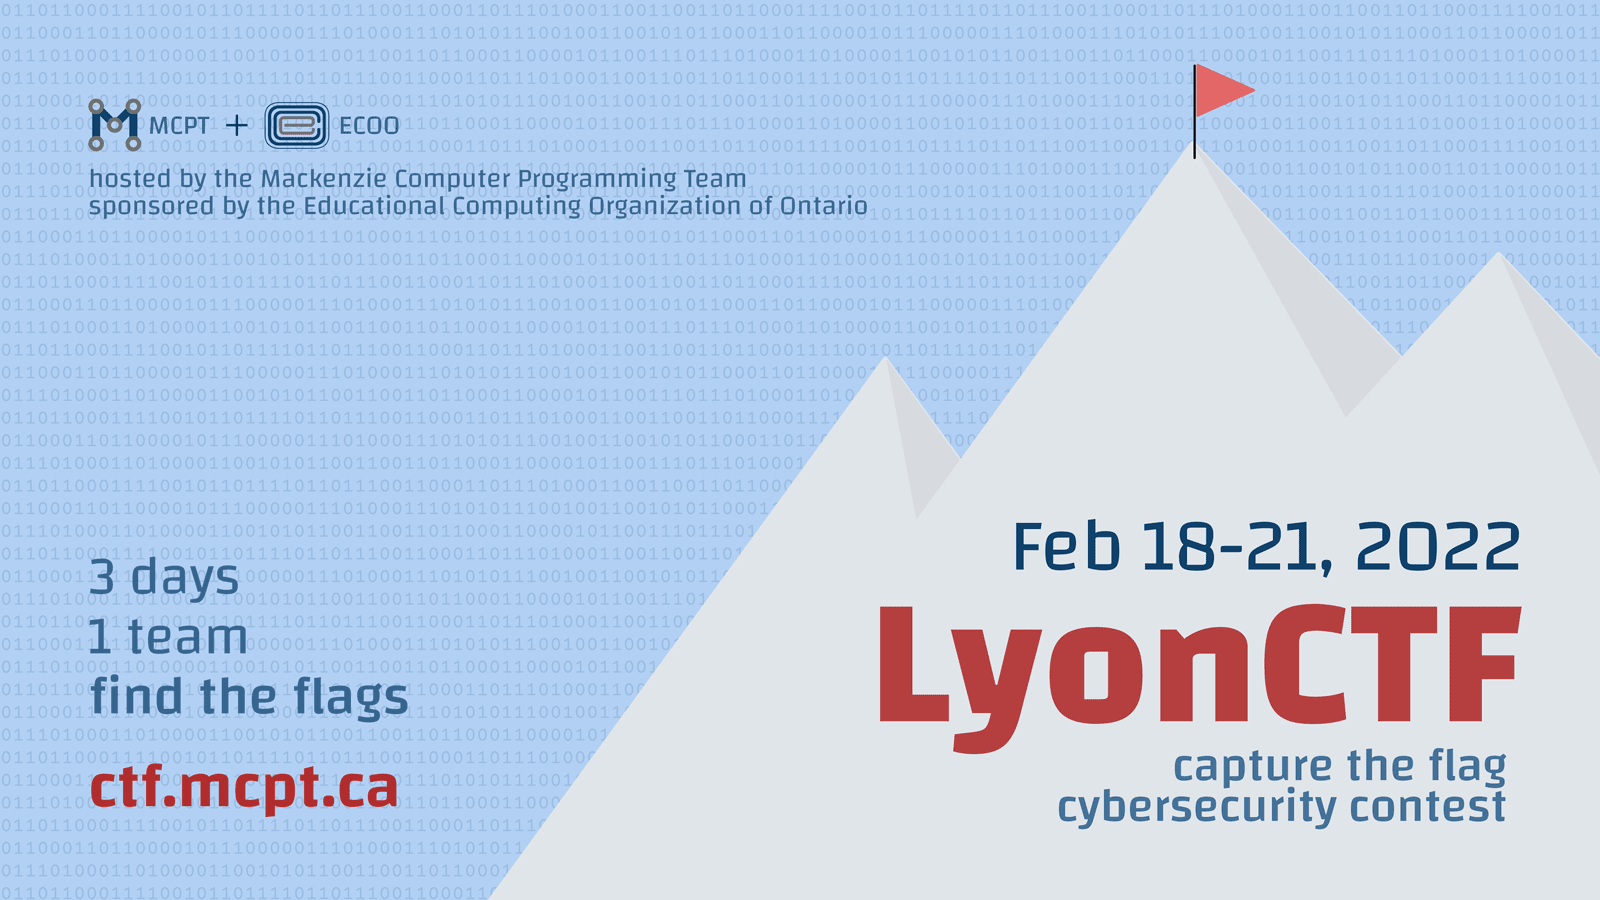 Cybersecurity Event for Students • Feb 18-21